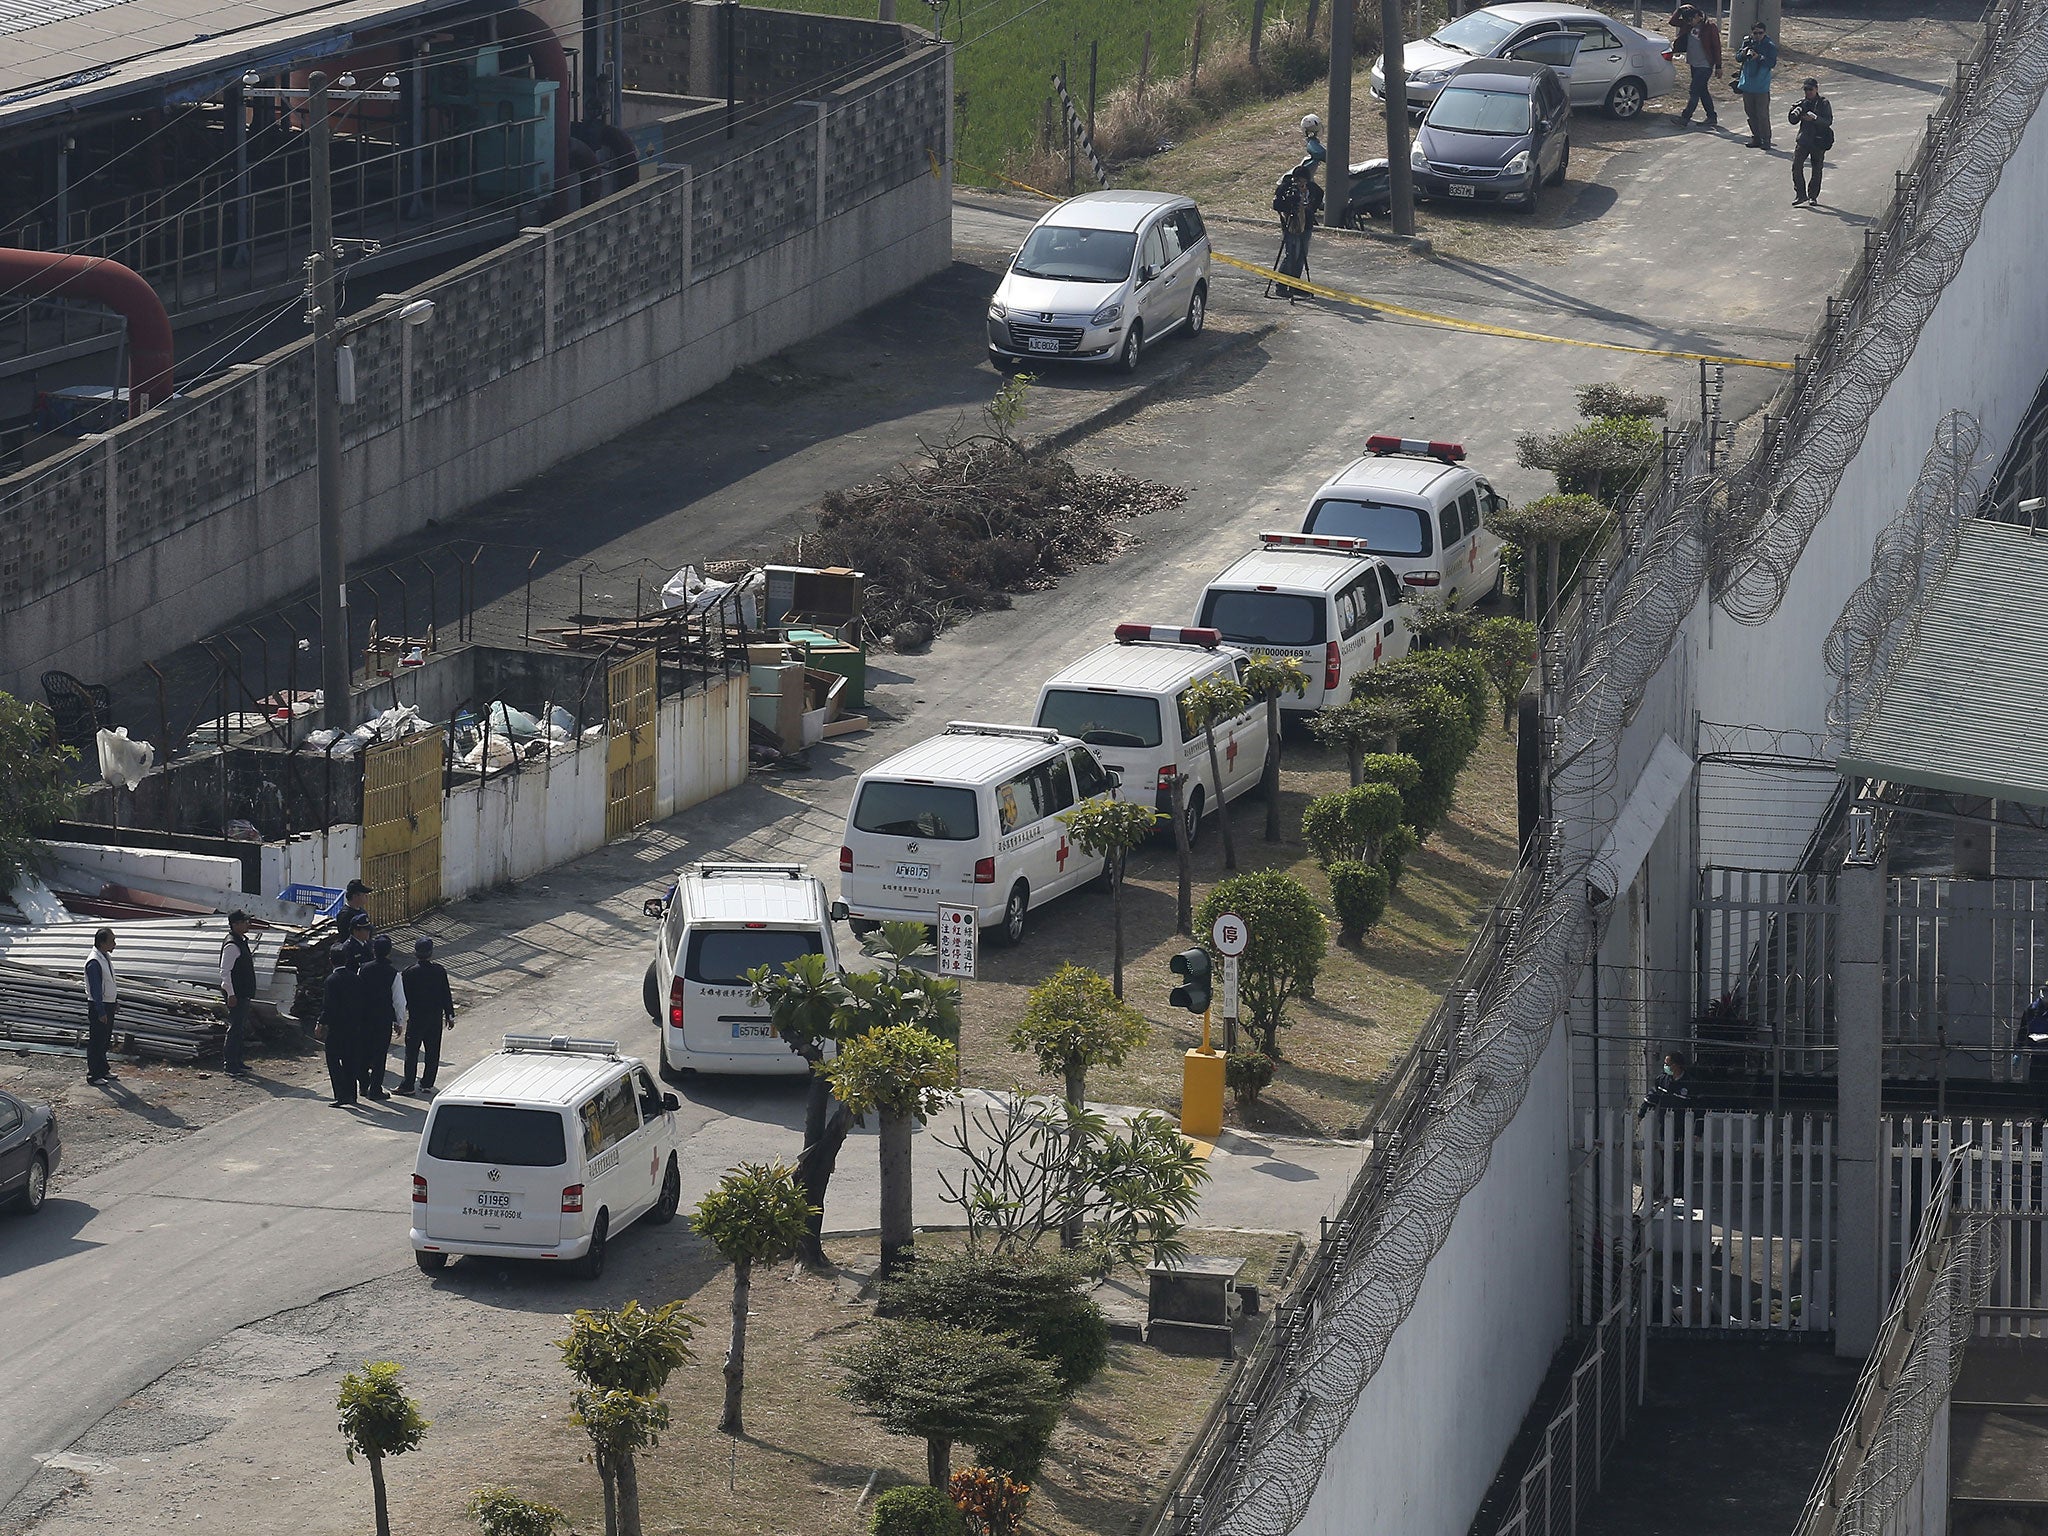 Ambulances wait outside of a prison after a standoff hostage situation in Kaohsiung